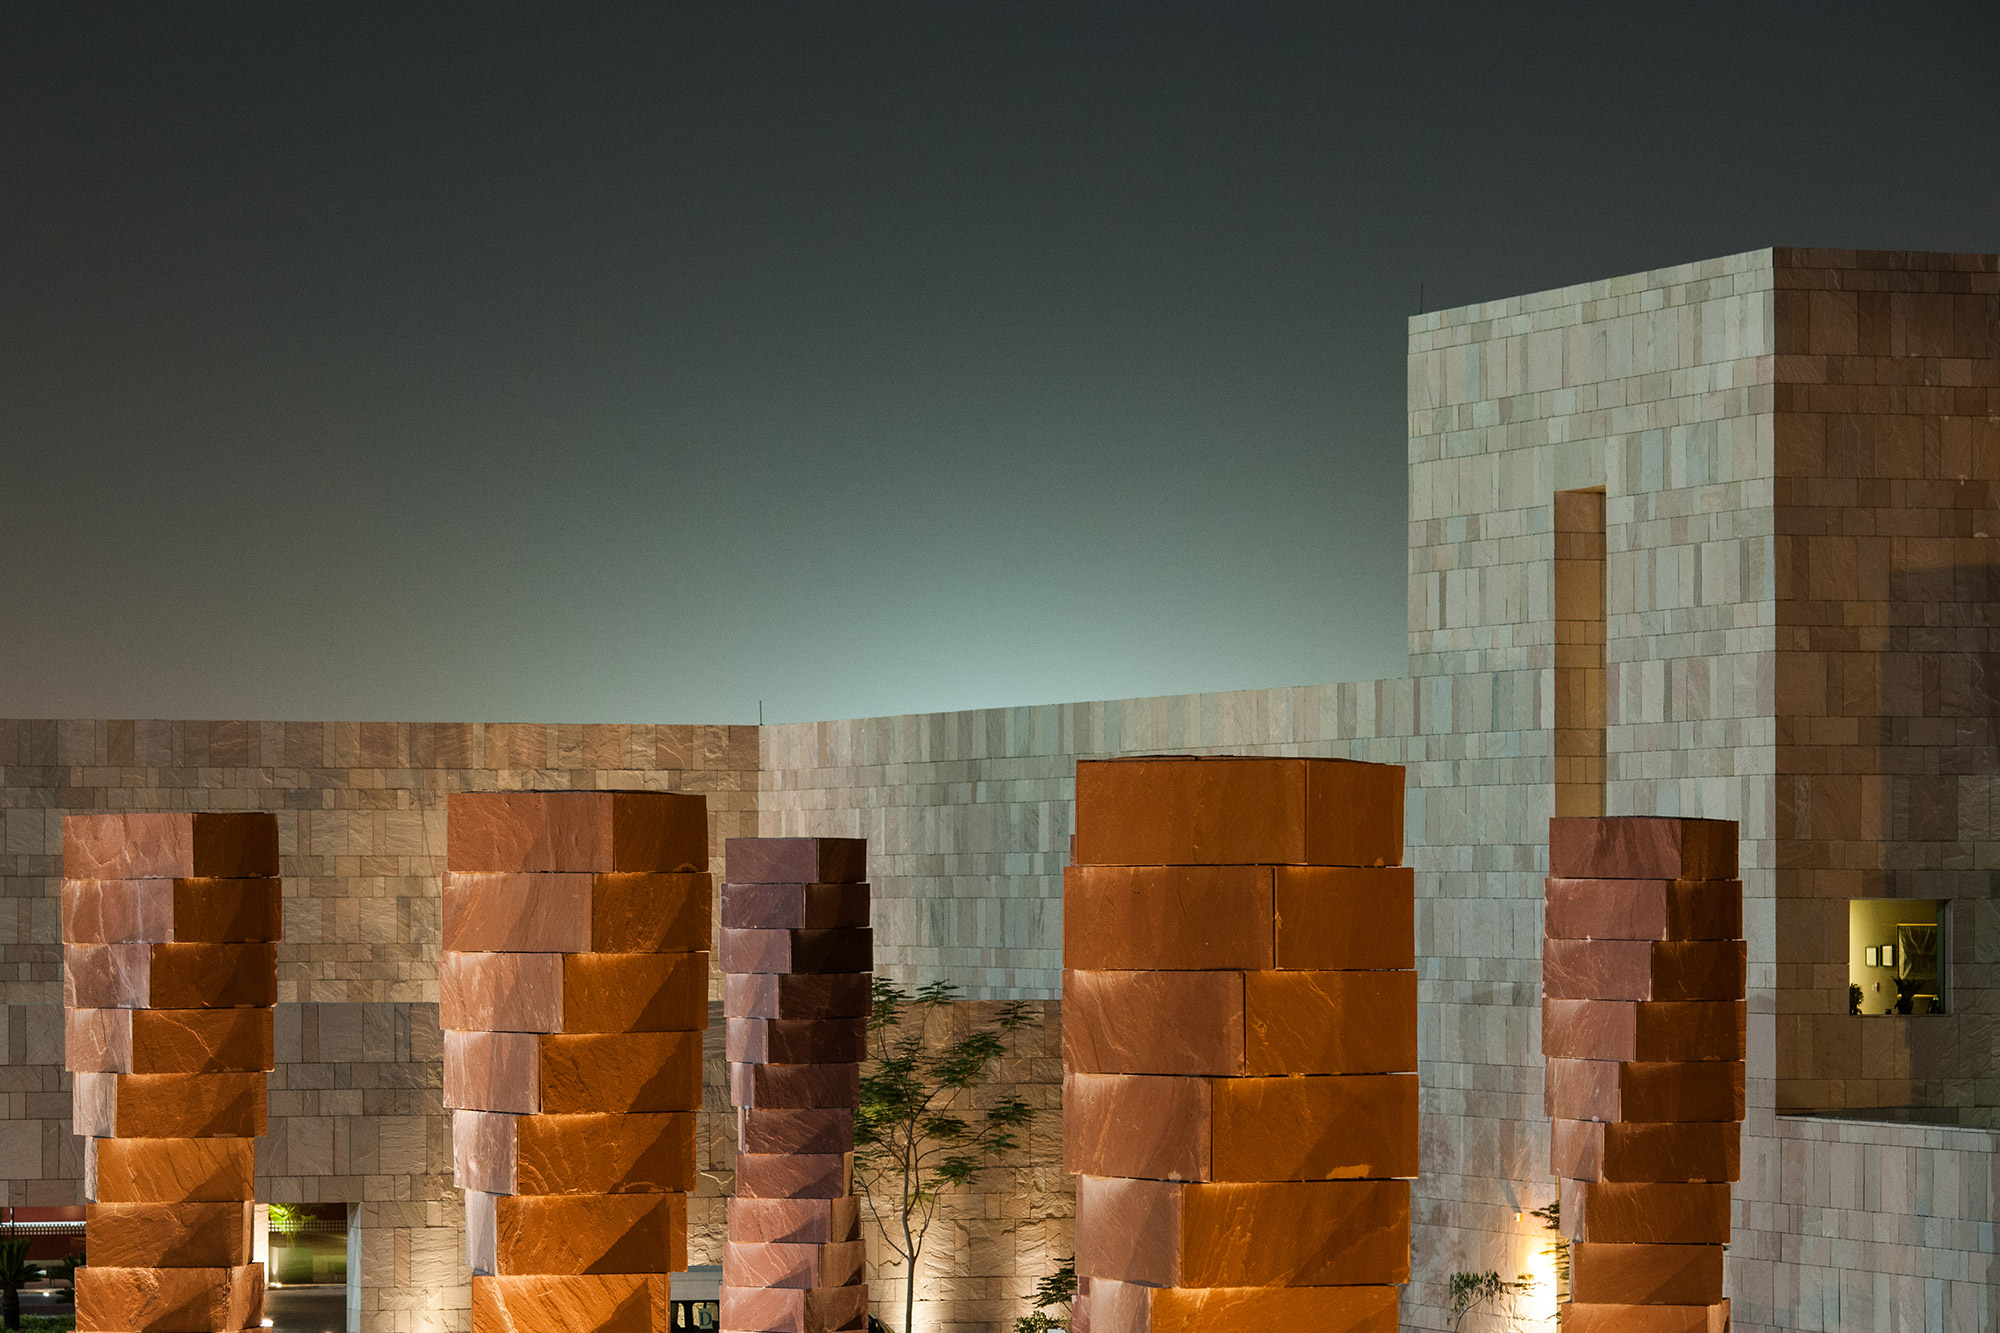 Iconic pillars in front of the GU-Q building, taken at night